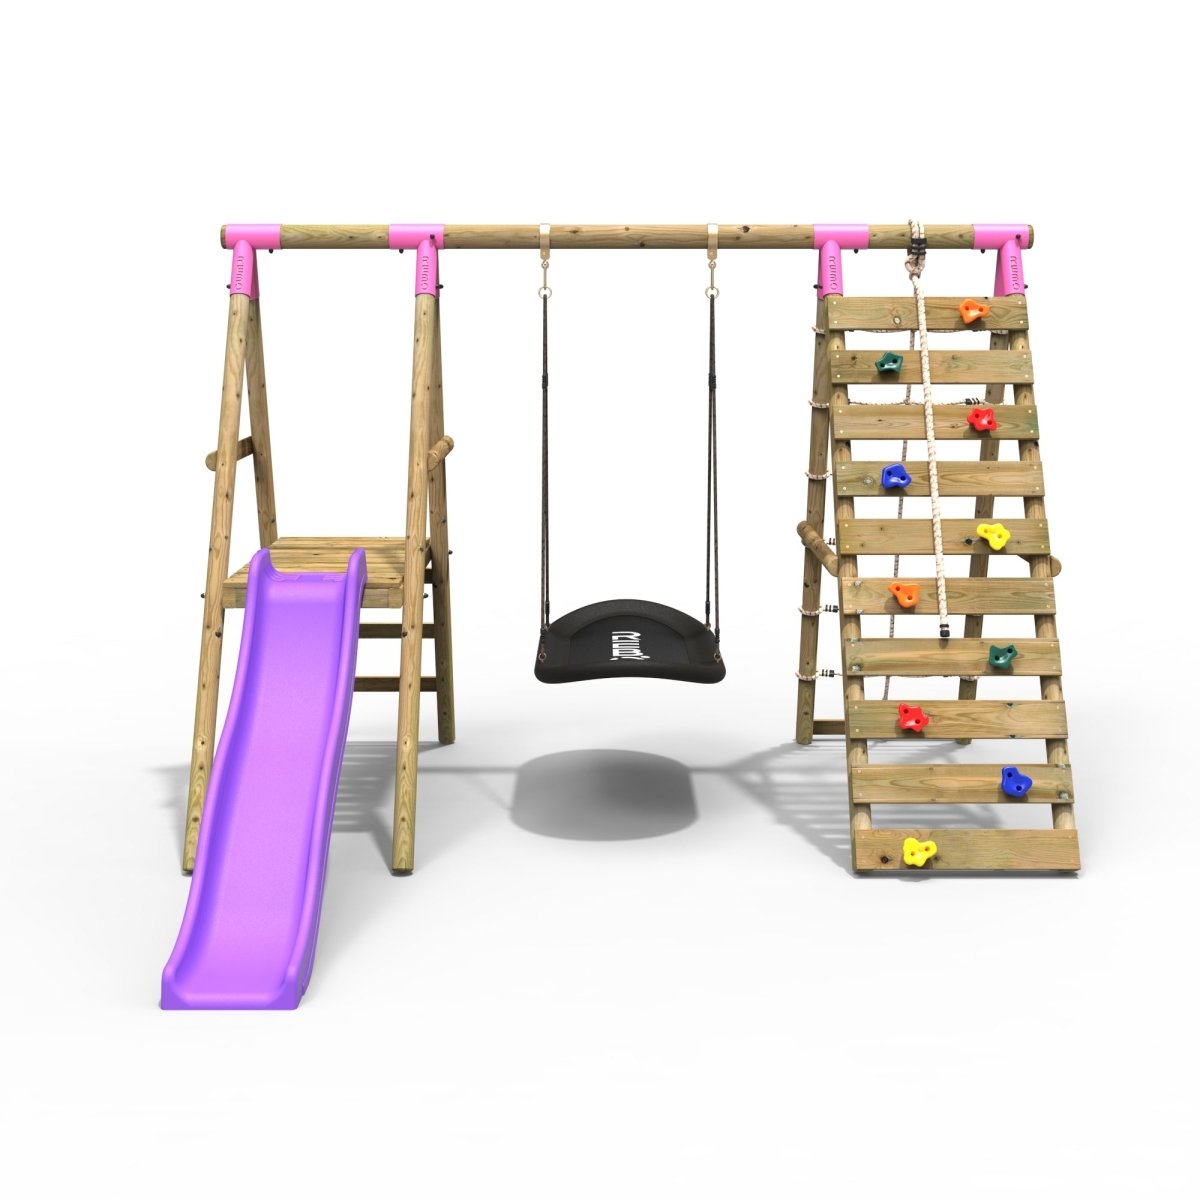 Rebo Wooden Swing Set with Deck and Slide plus Up and Over Climbing Wall - Onyx Pink